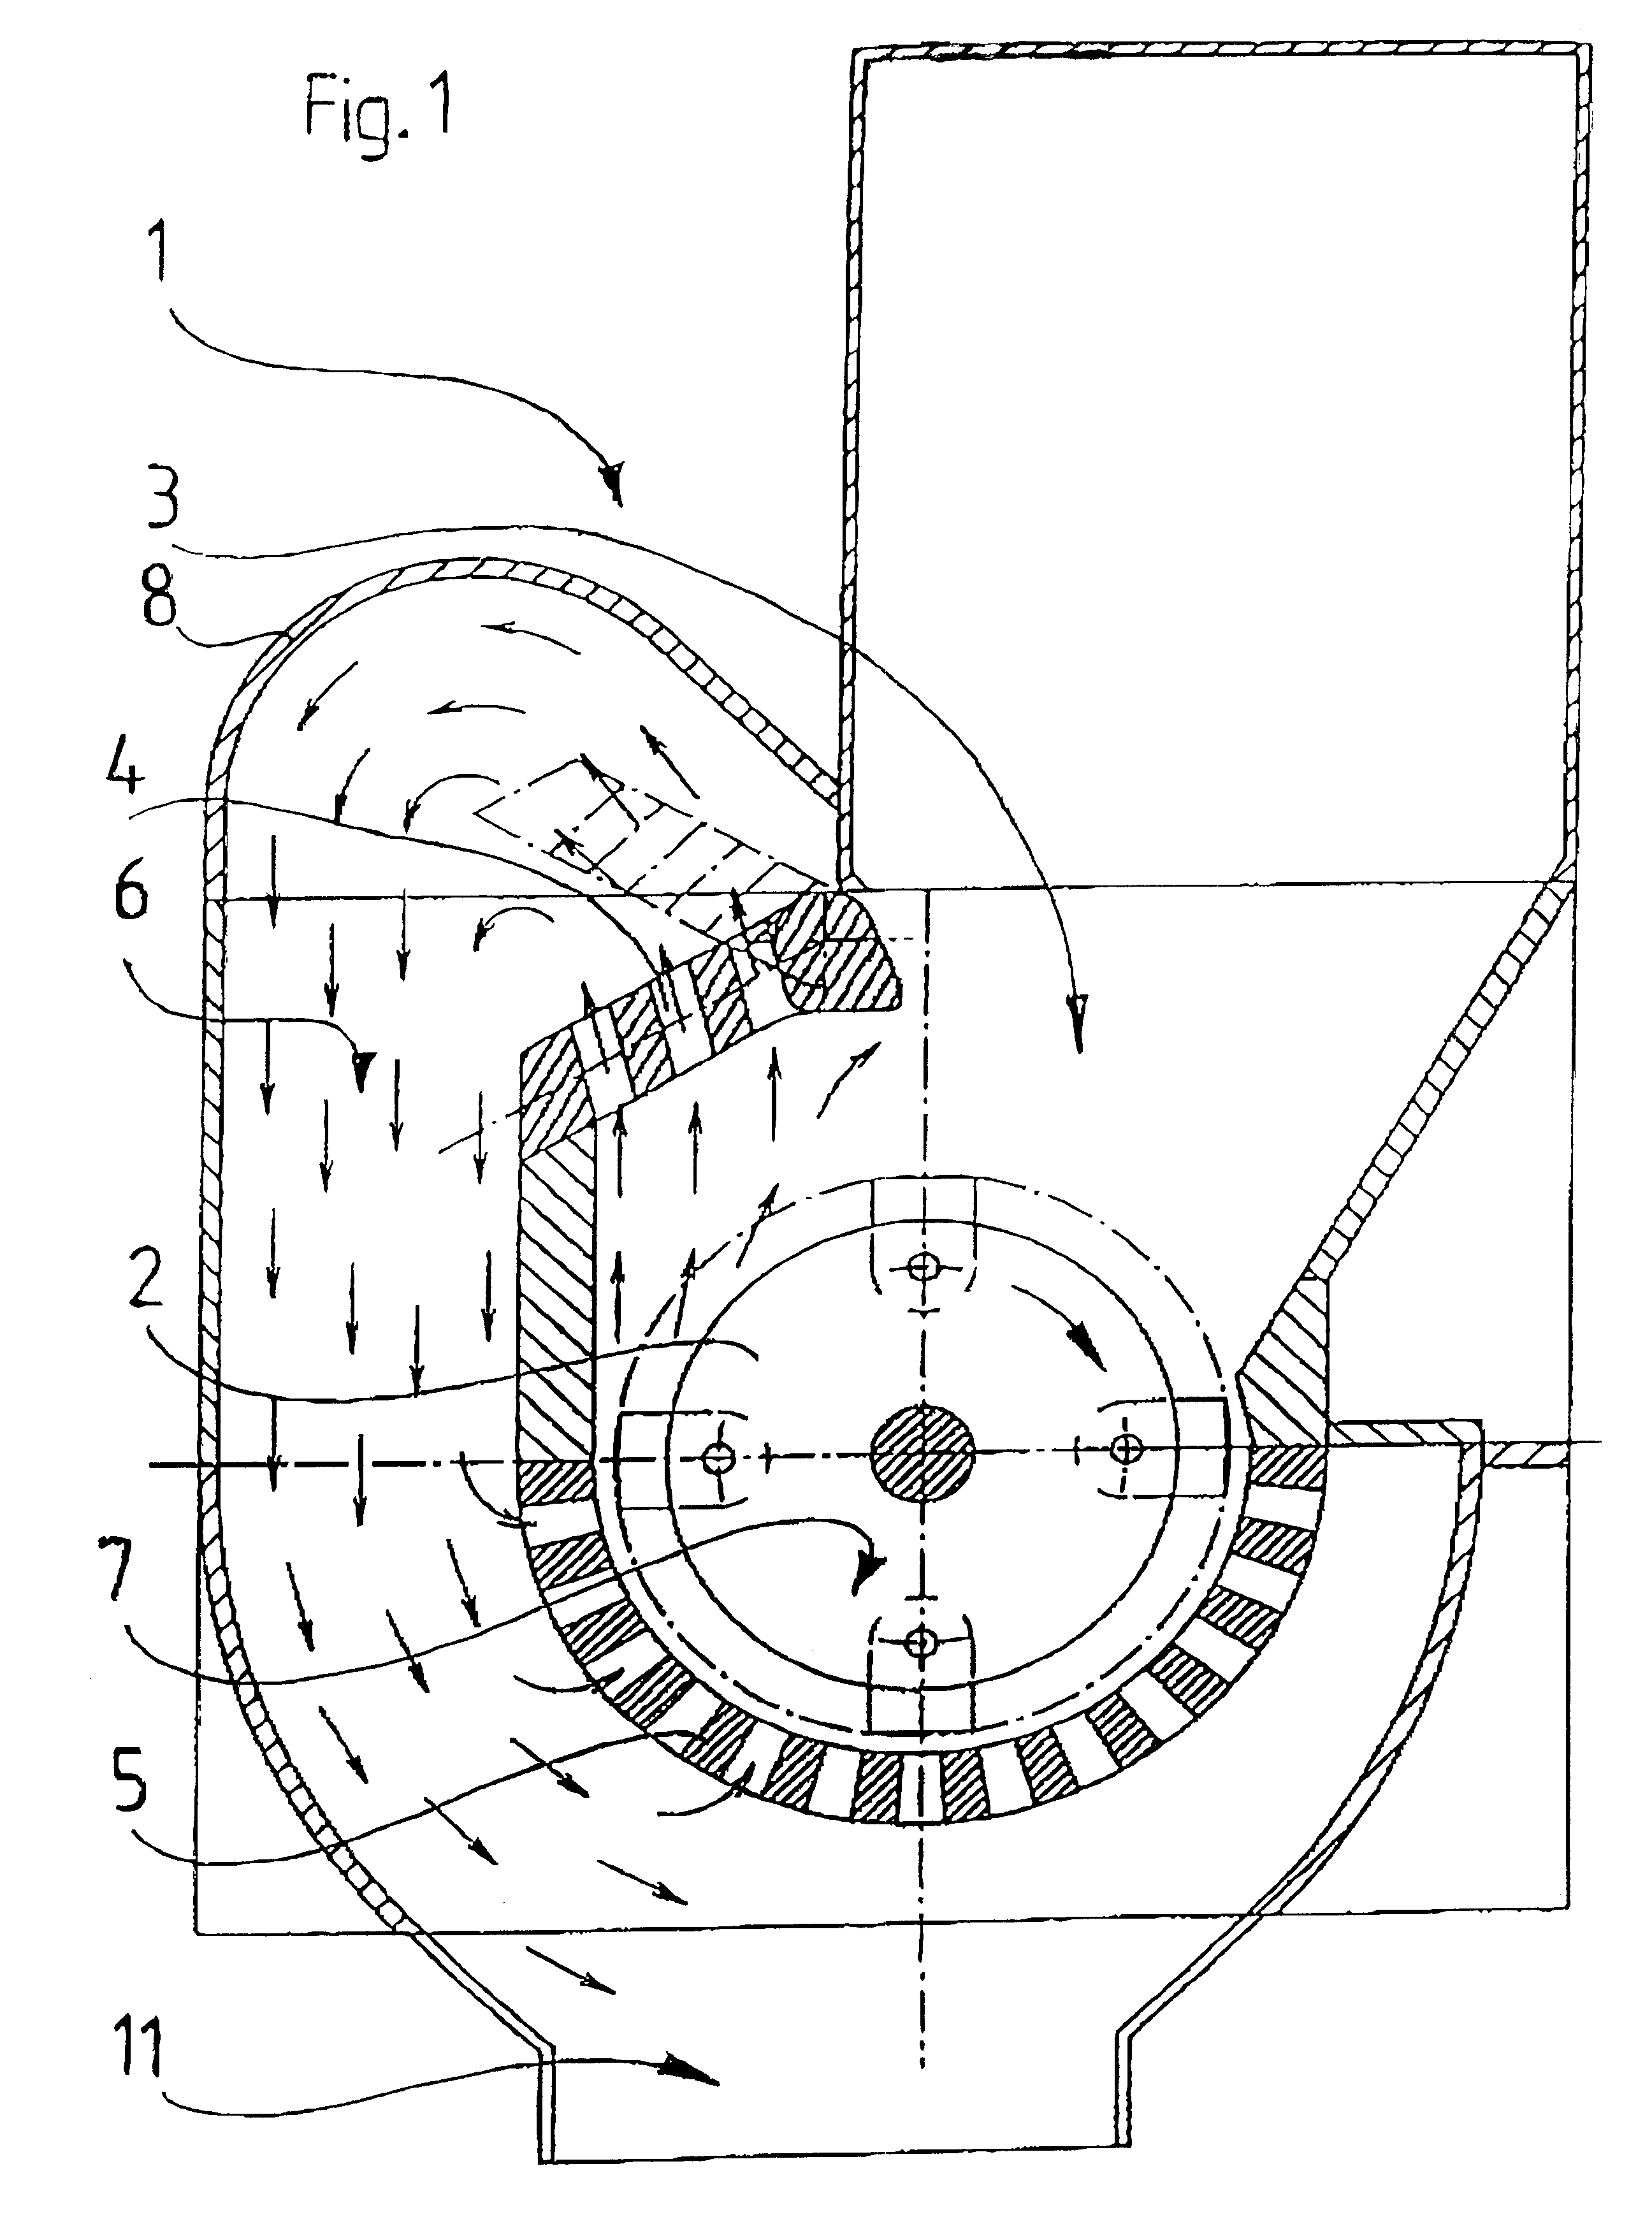 Method for operating the air circuit and conveying stock flow in the casing of a hammer mill